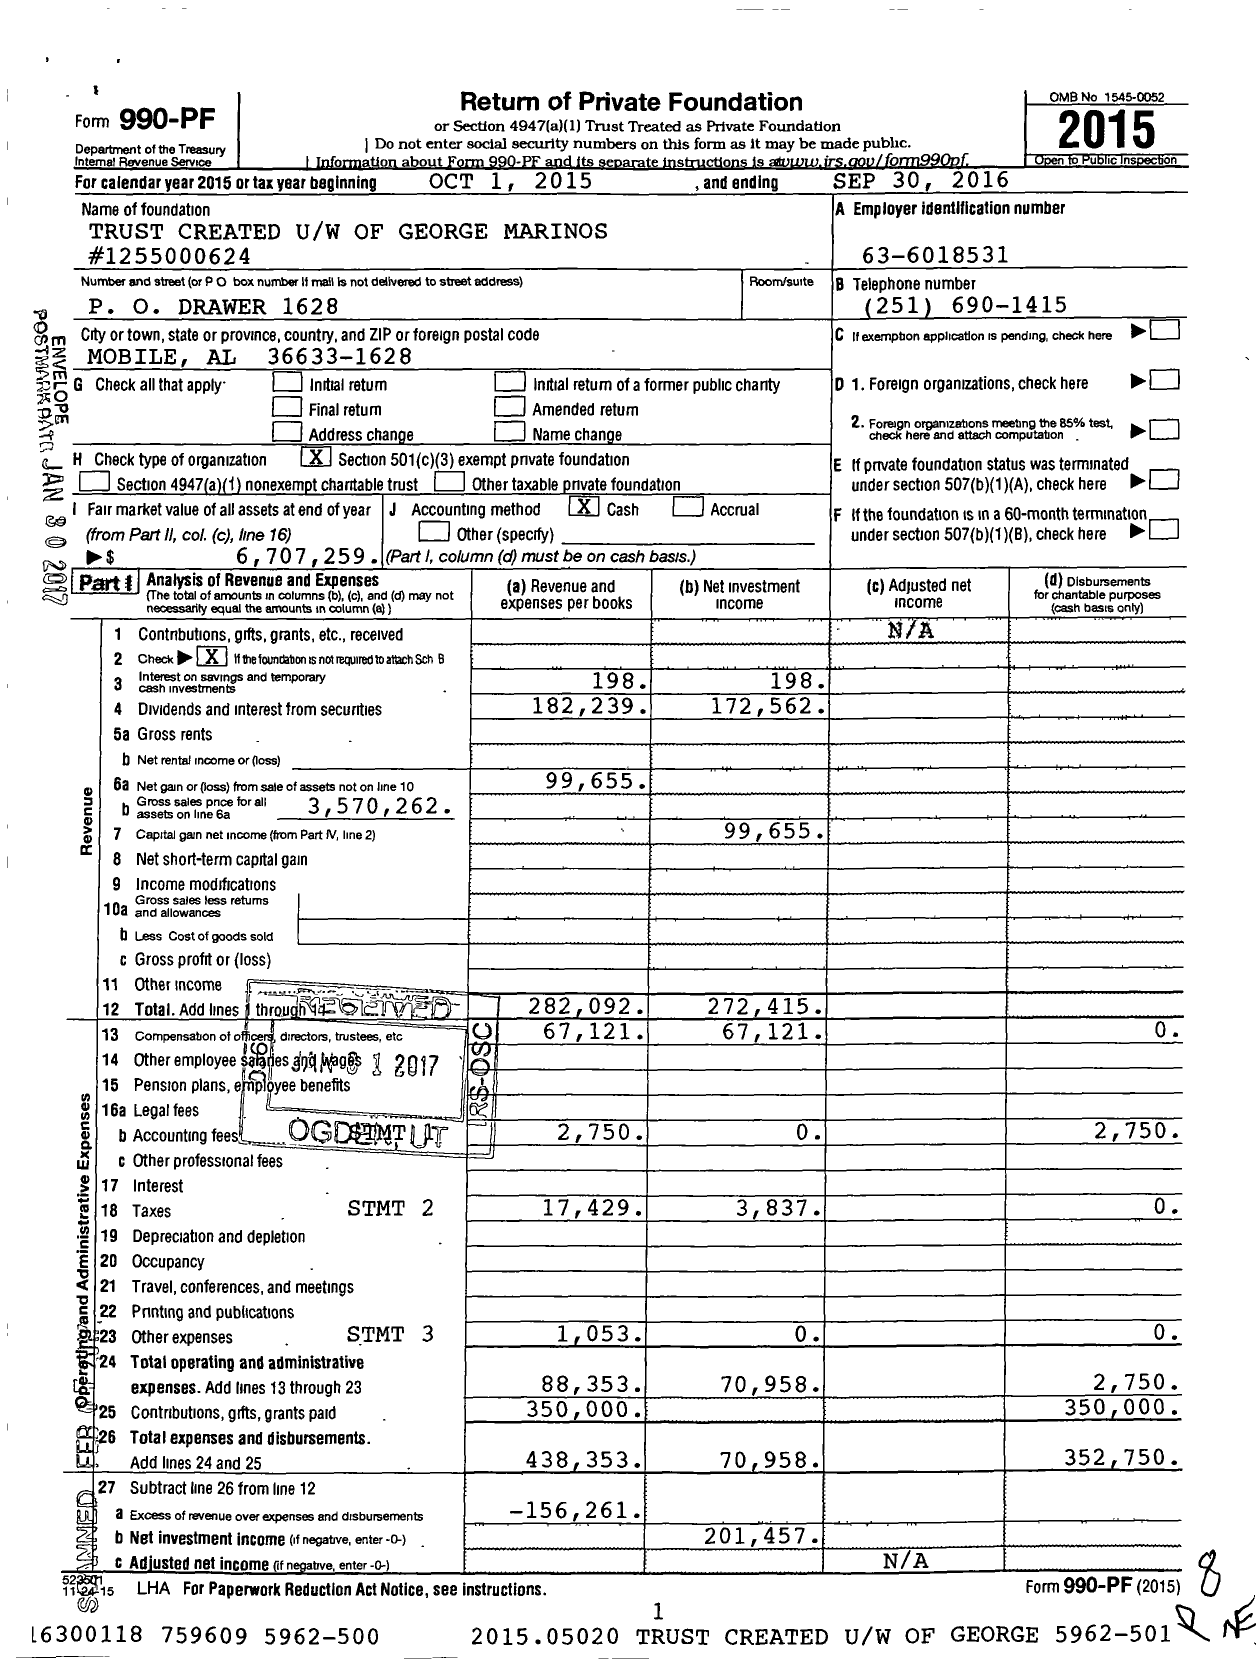 Image of first page of 2015 Form 990PF for Trust Created Uw of George Marinos #1255000624 Regions Bank